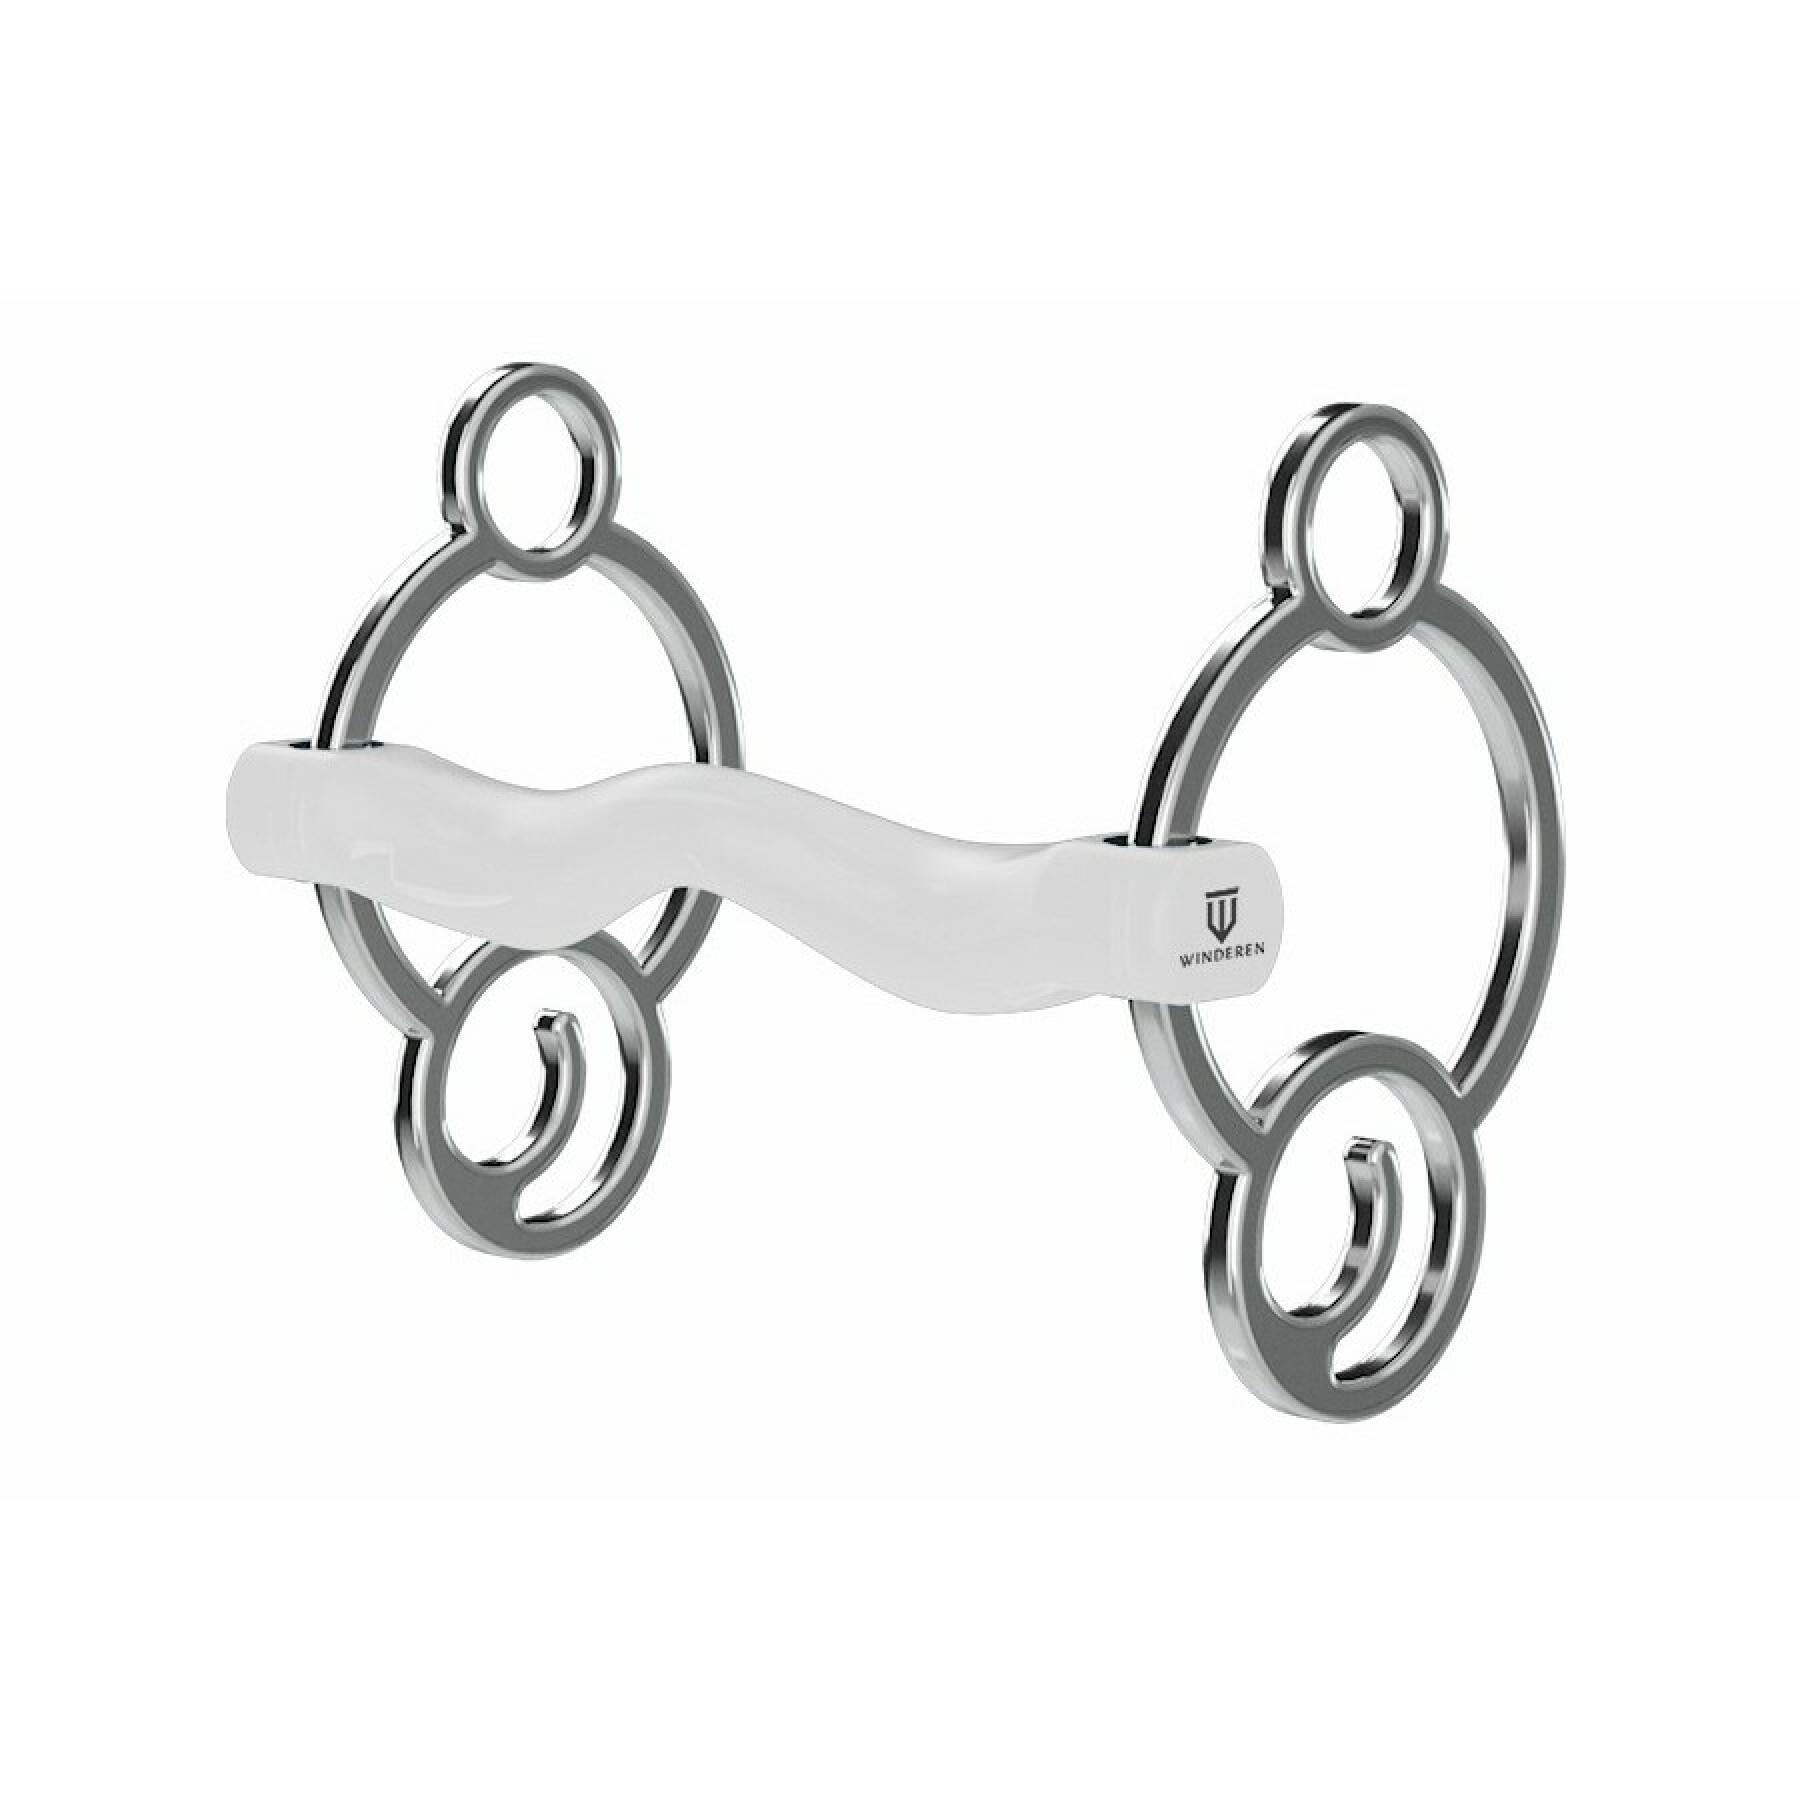 Pessoa bit for straight barrel horse with tongue hole Winderen